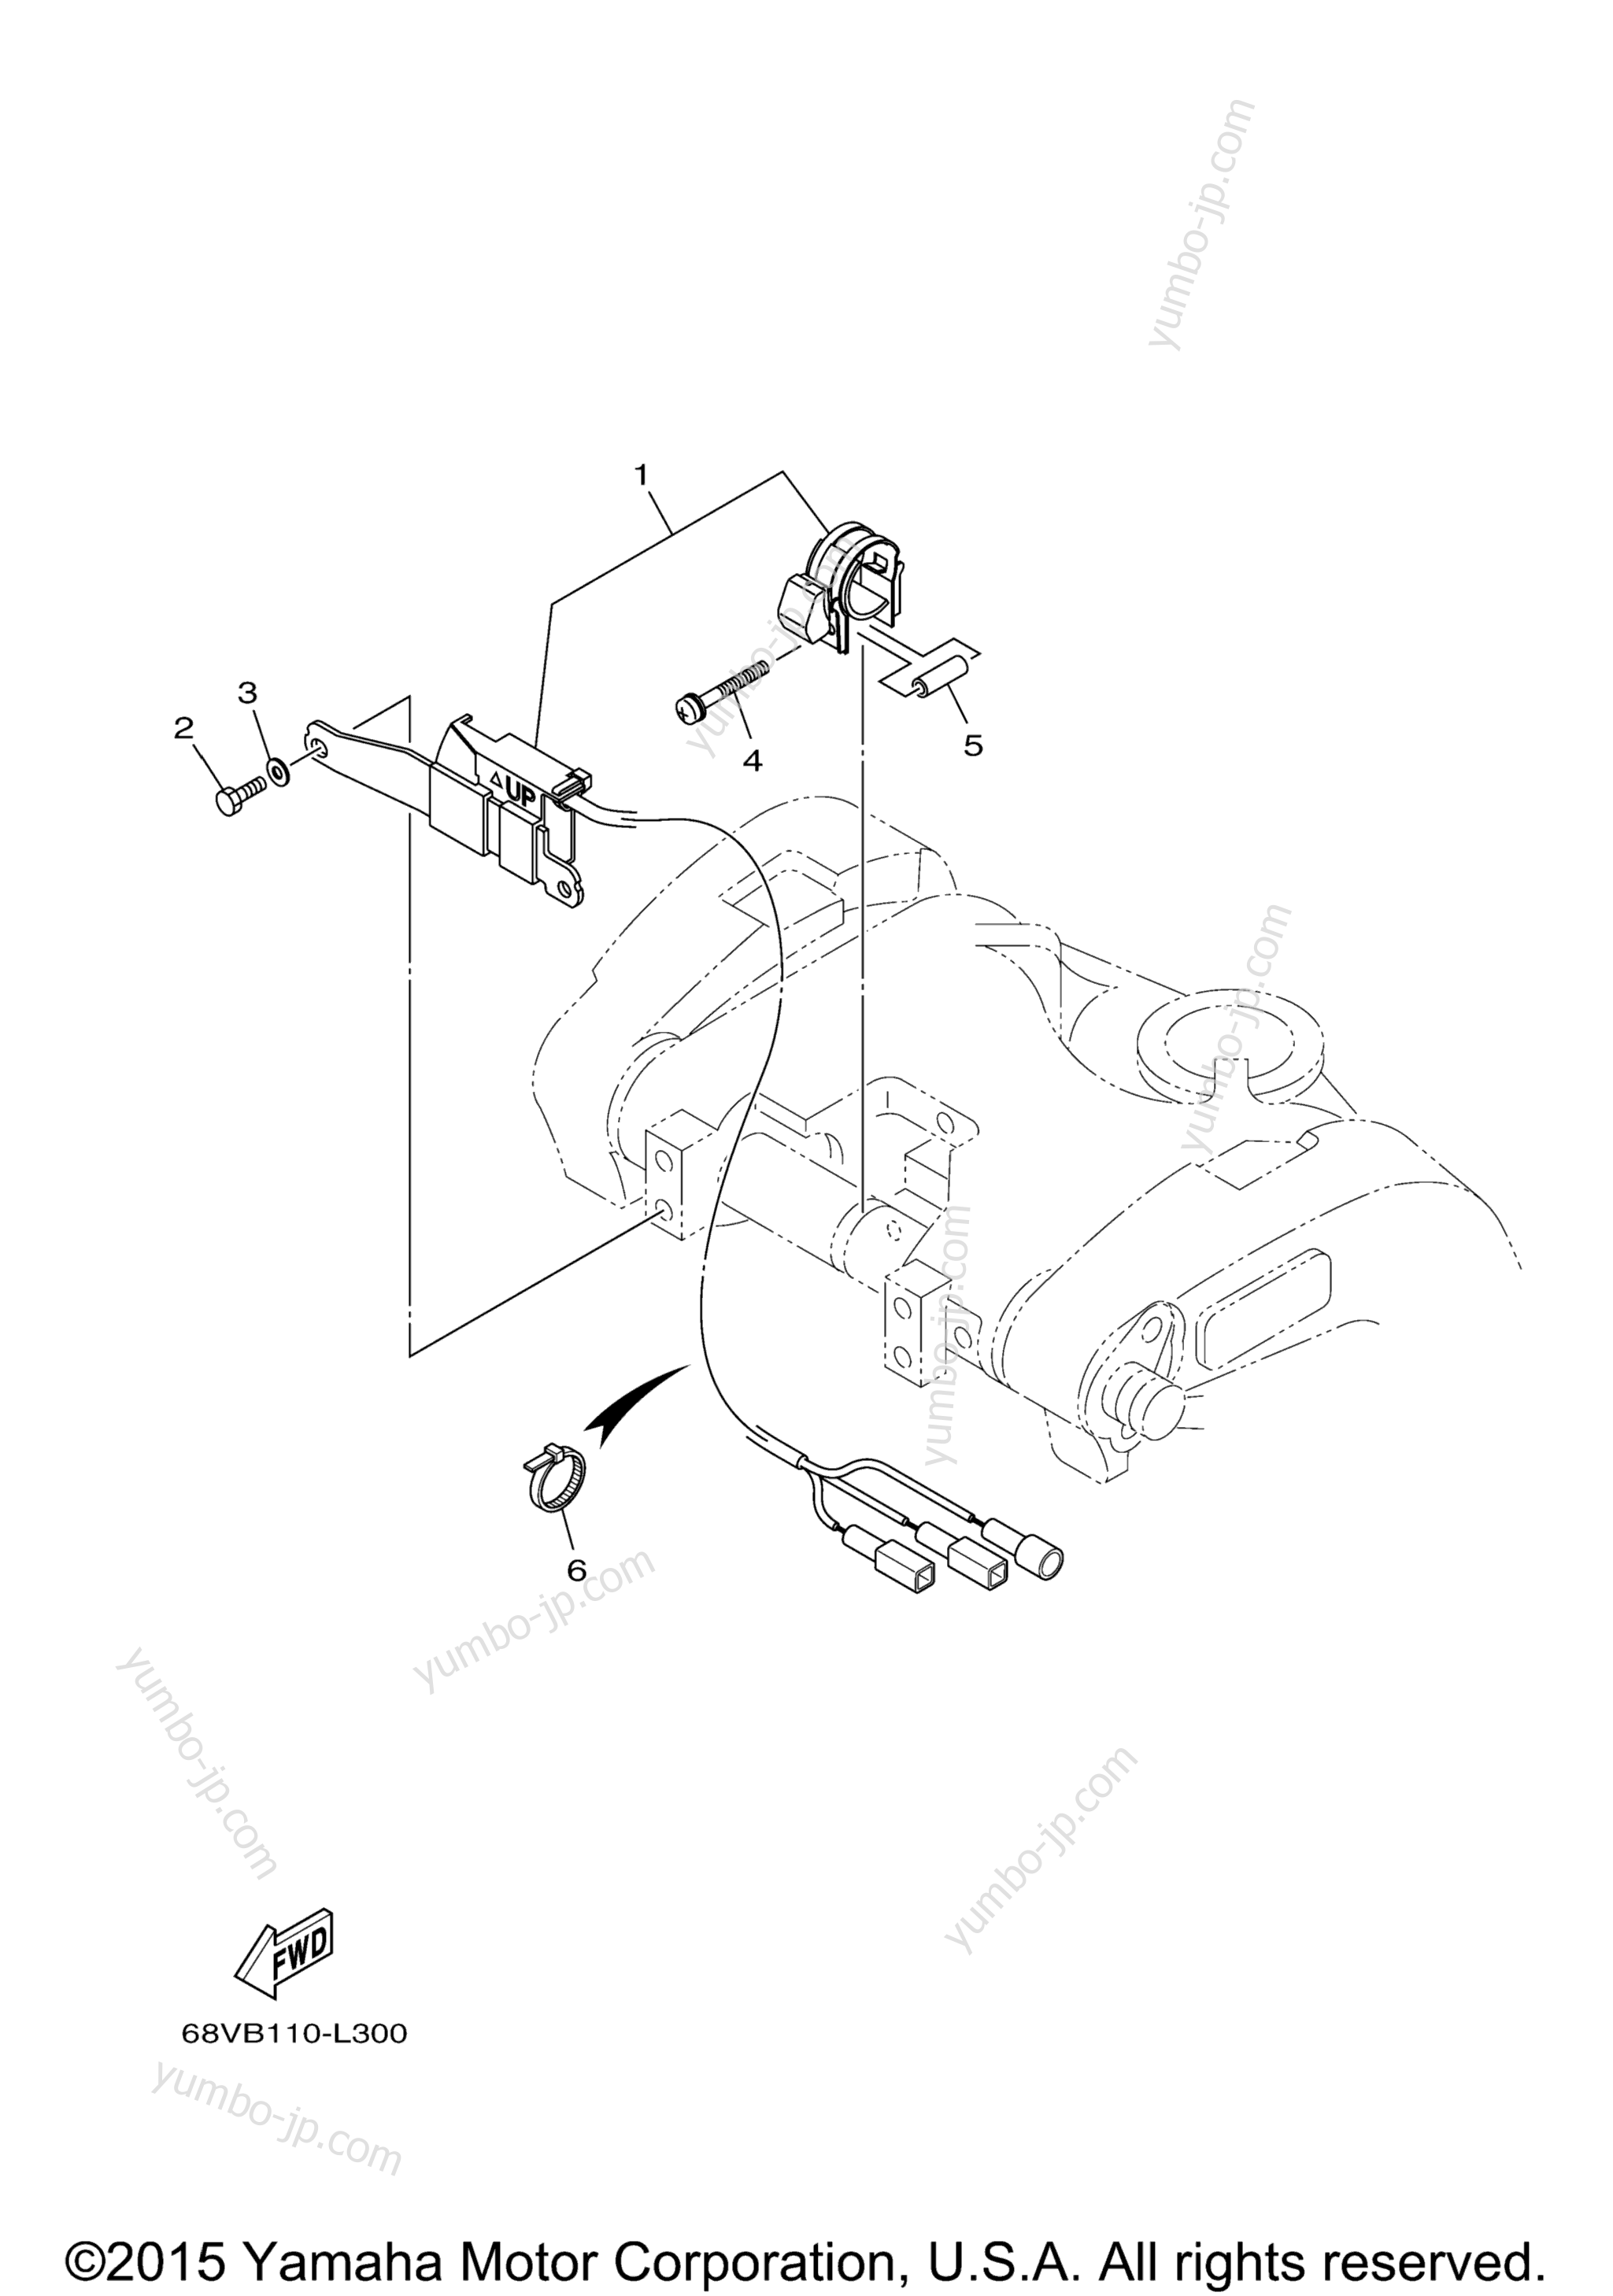 Optional Parts 2 for outboards YAMAHA LF115XA_06 (0611) 2006 year